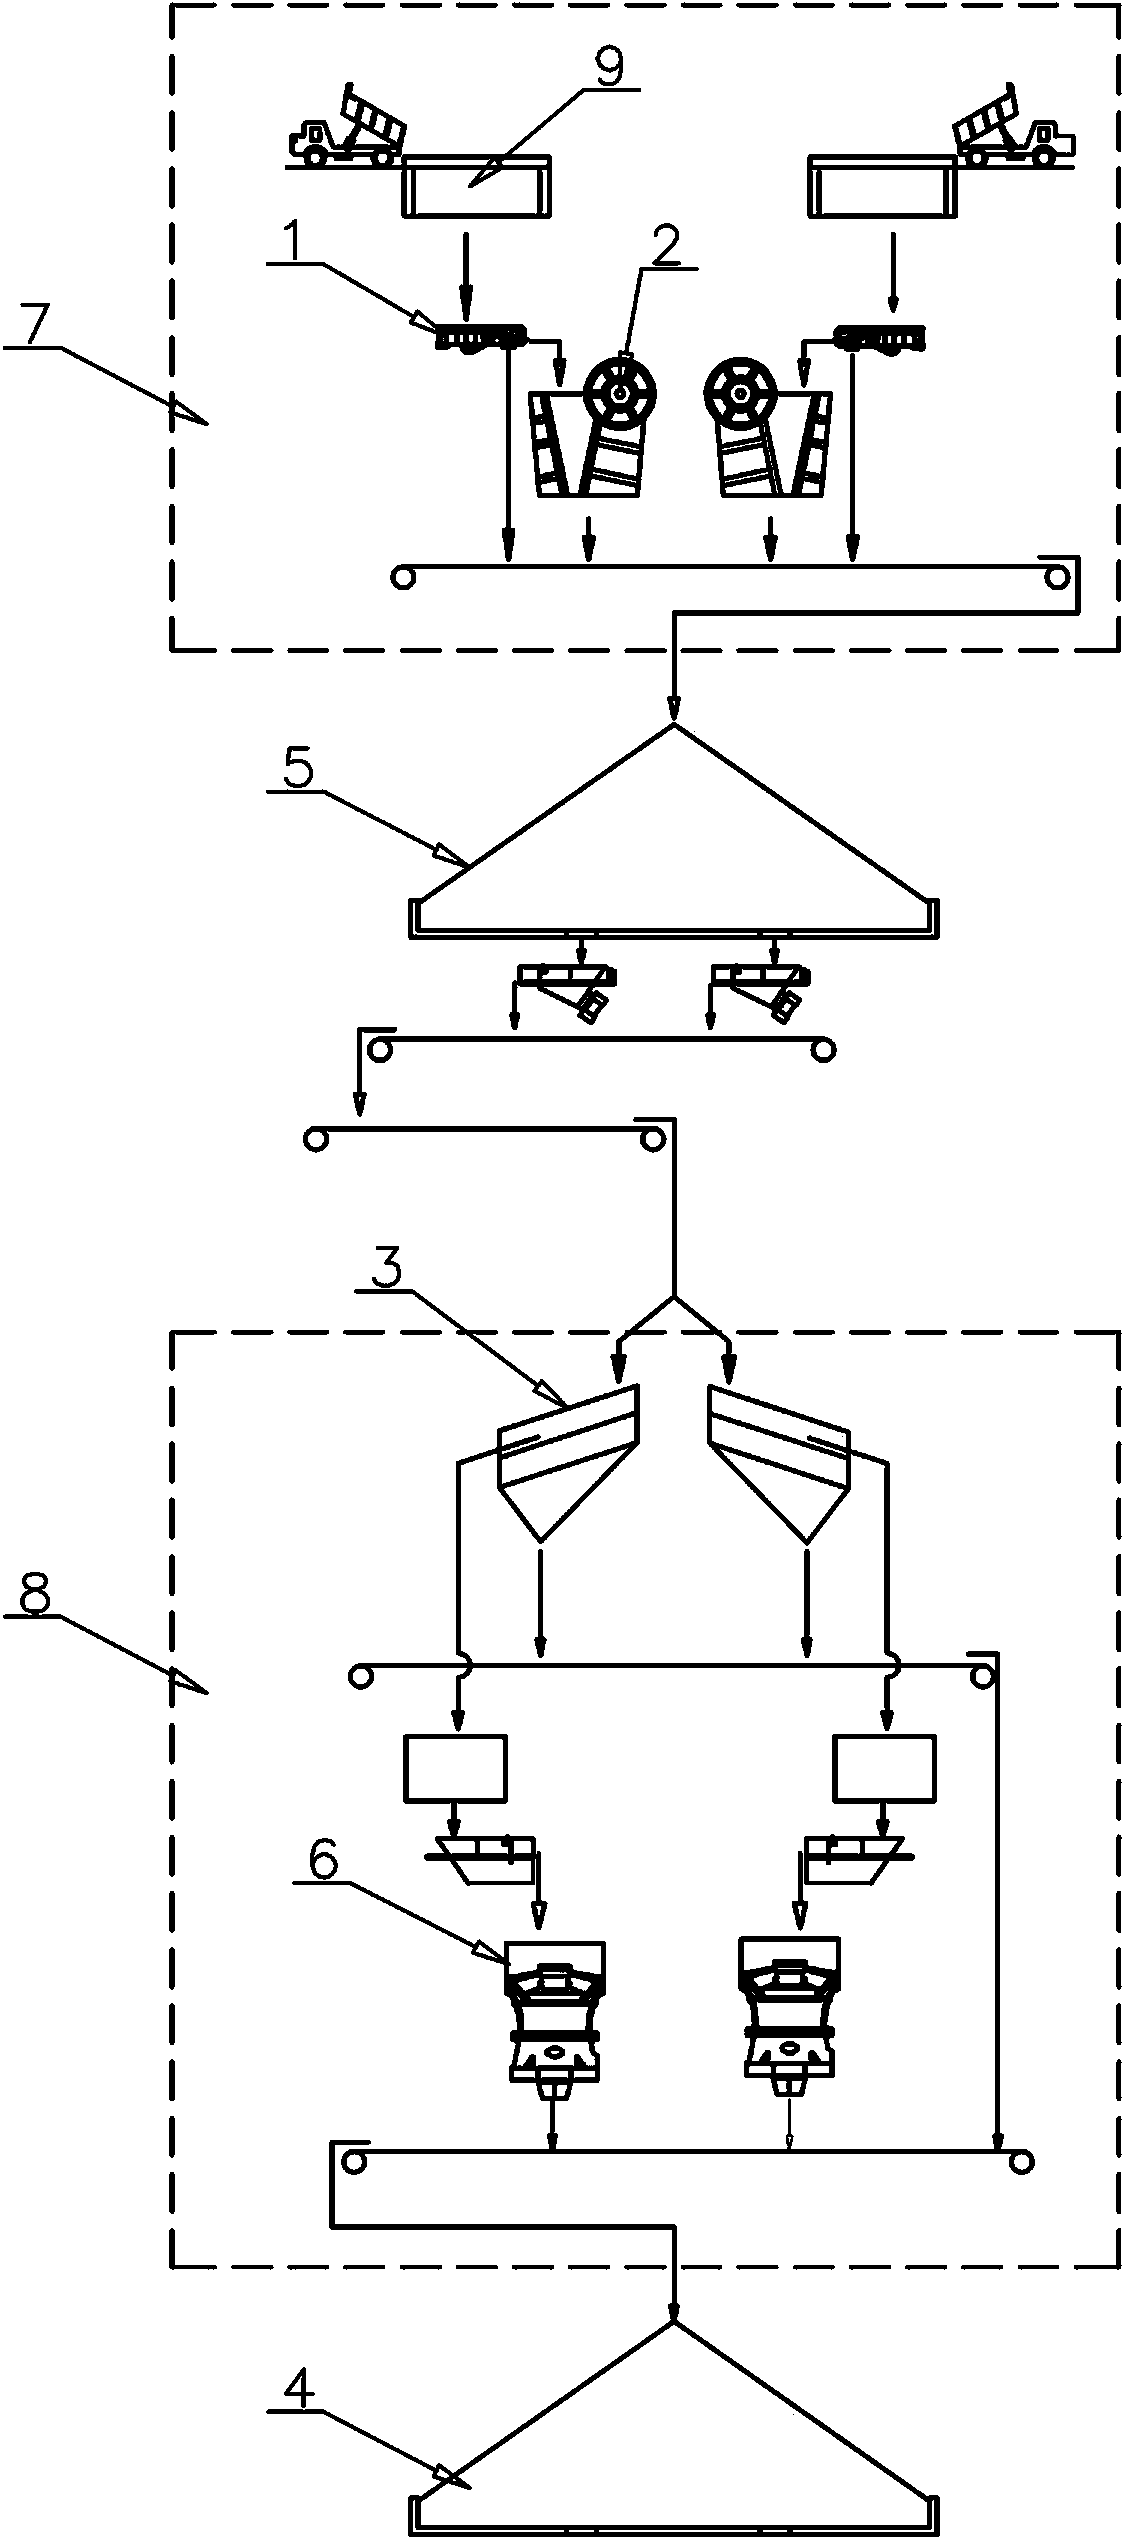 Dam core wall gravel-doped stone preparation system and method